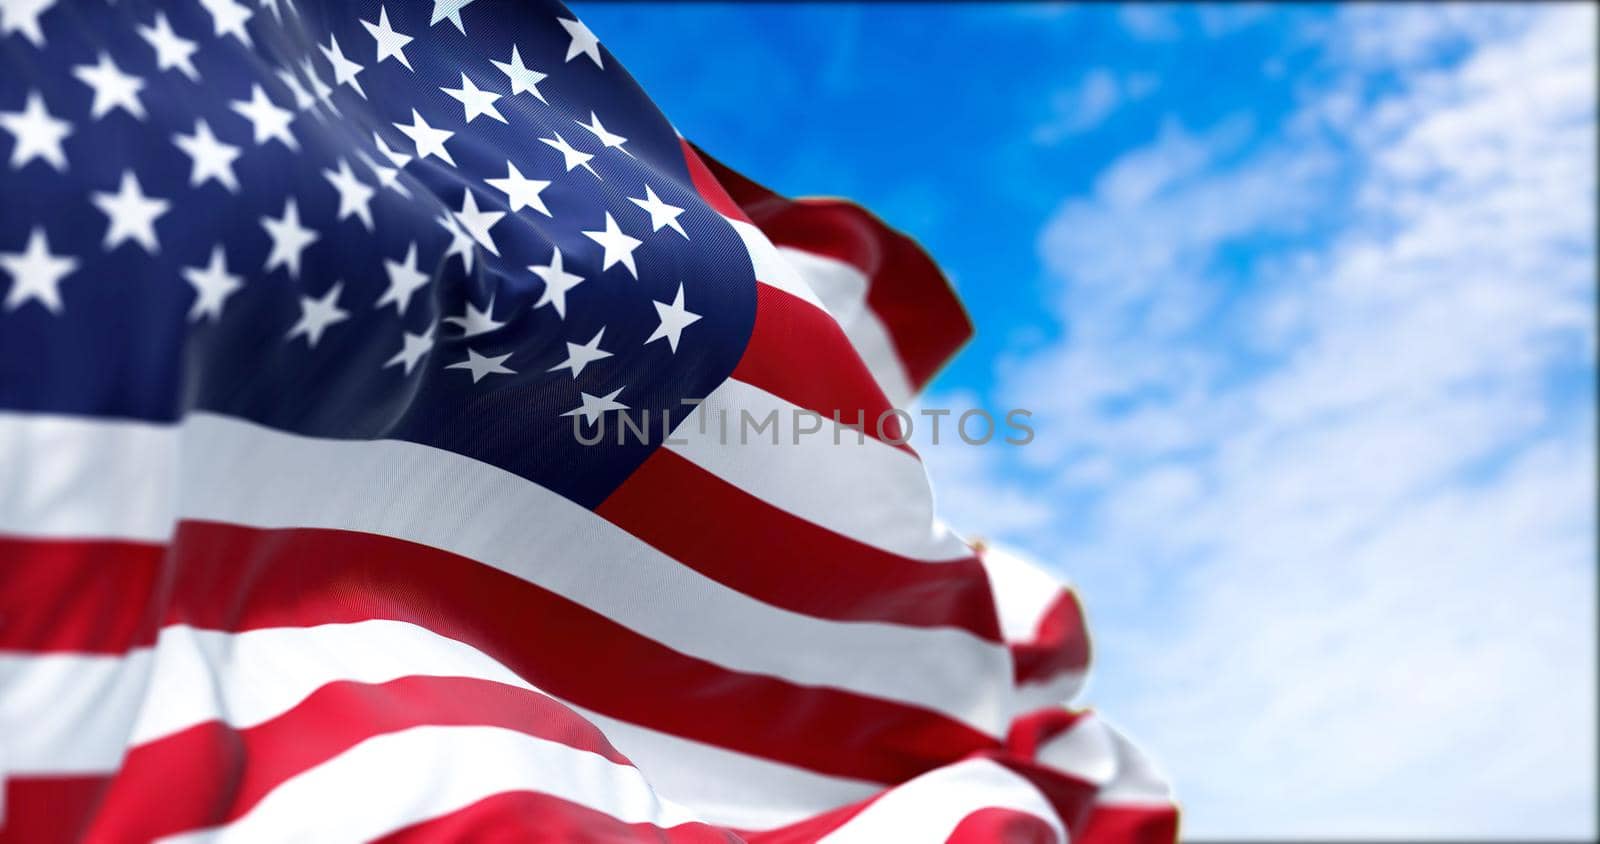 The national flag of the United States of America waving in the wind by rarrarorro